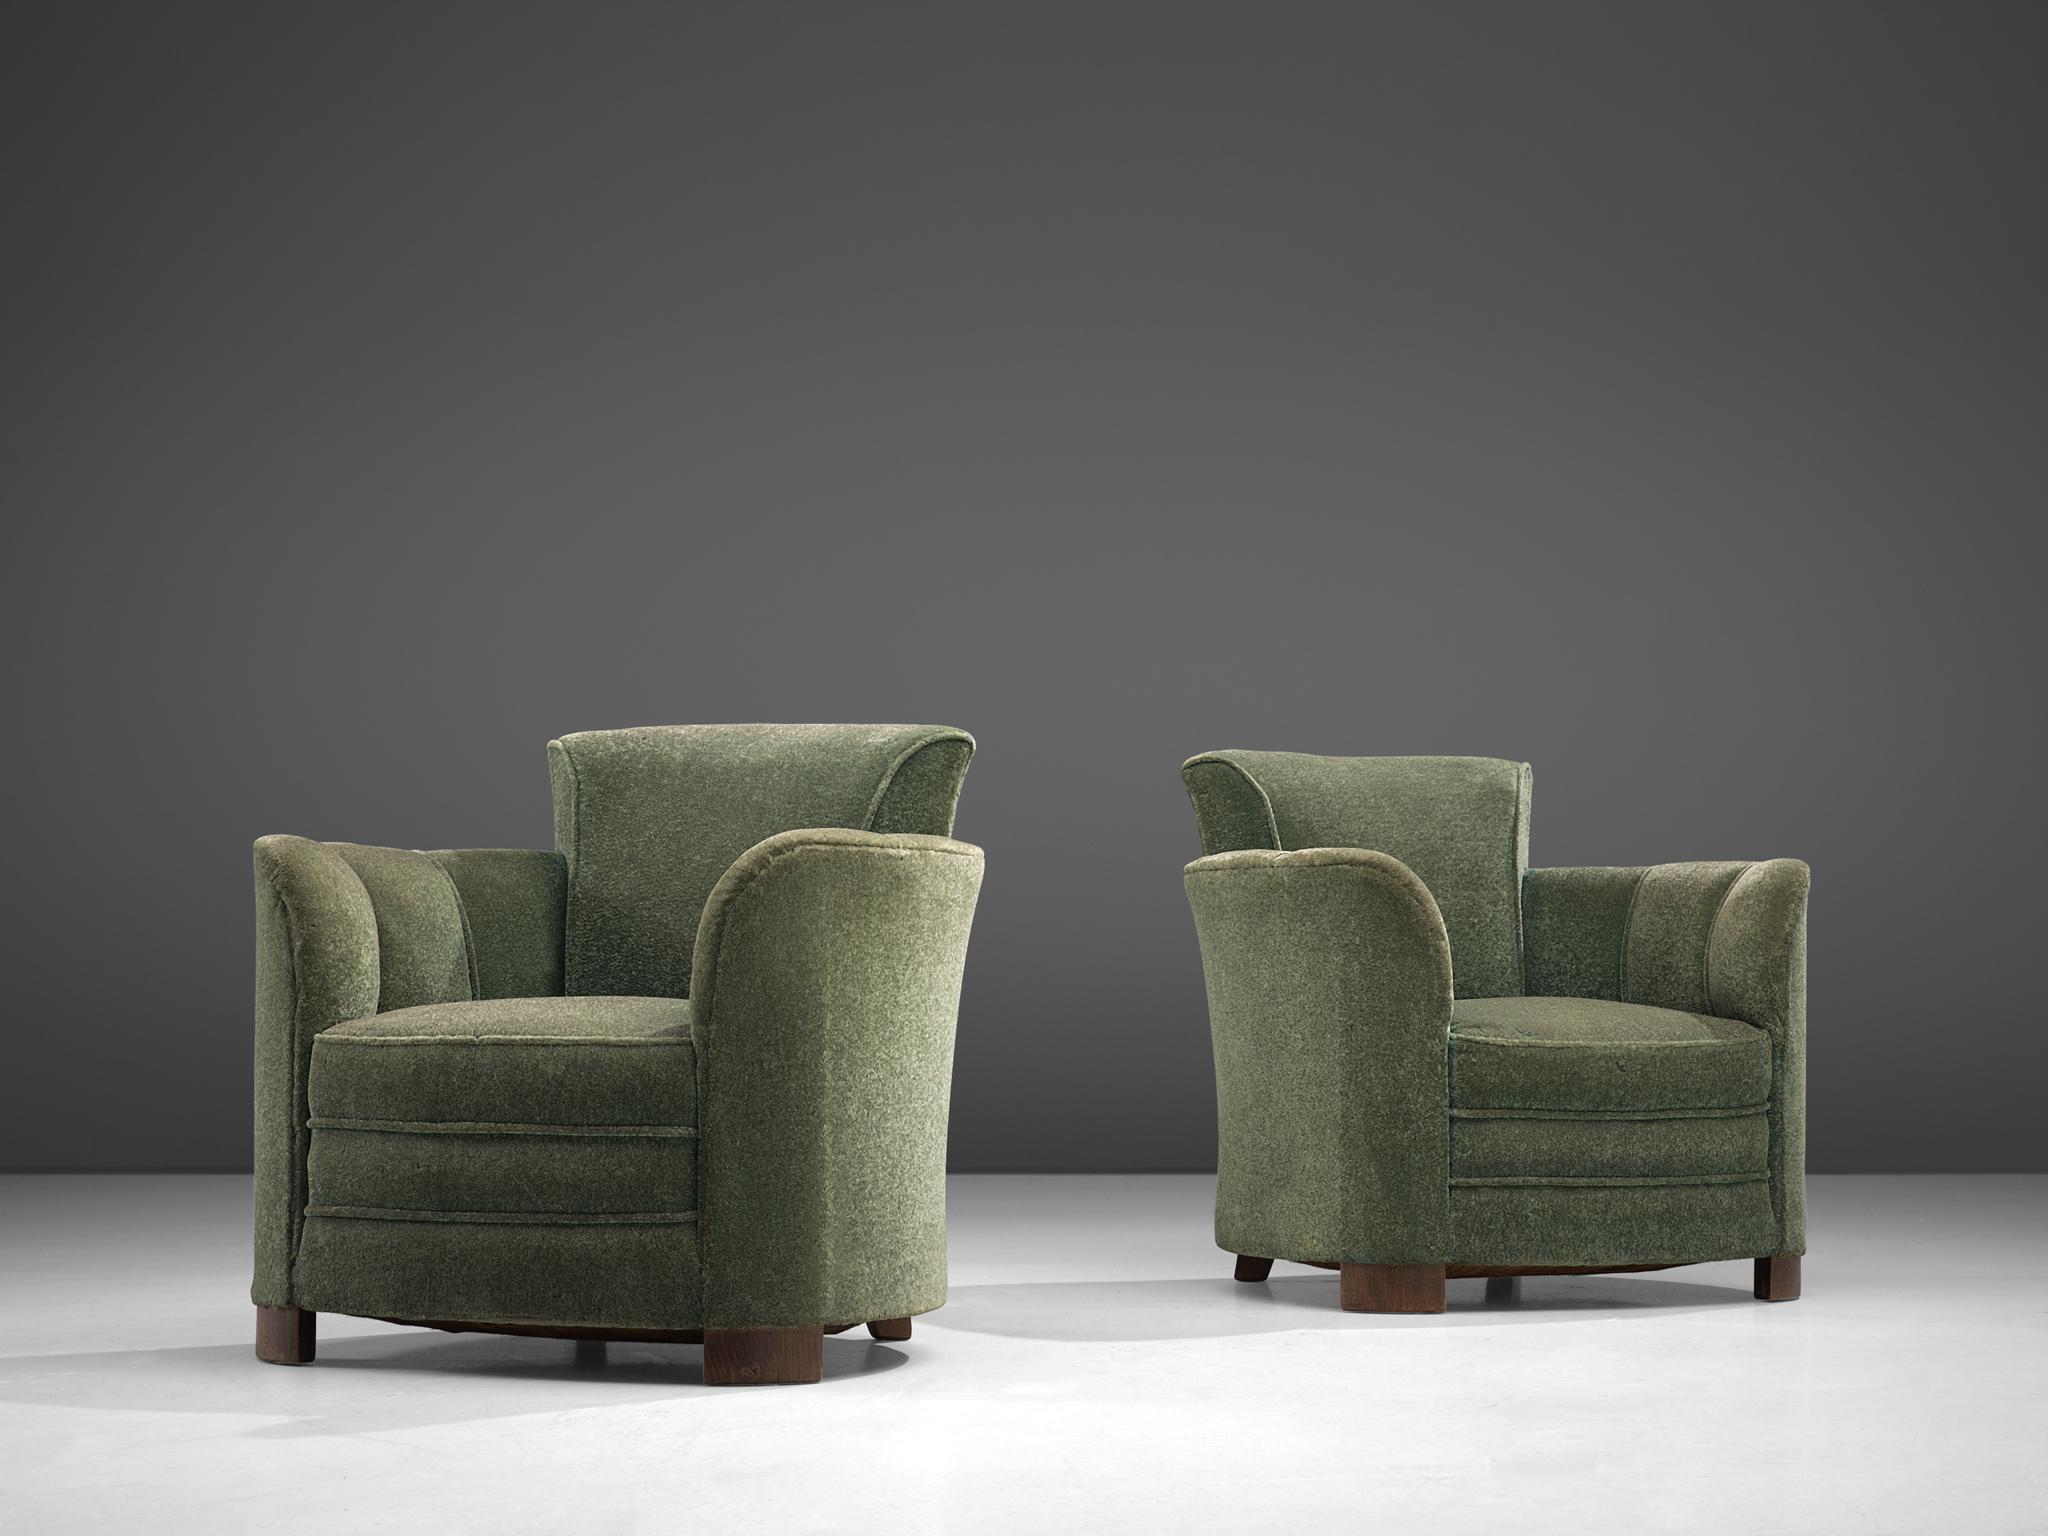 Pair of lounge chairs, oak and green velours, France, 1940s.

Rounded, comfortable chairs with a high back in a green fabric upholstery. The chairs are modest yet very well designed with the upswooping armrests and the almost perfect rounded chape